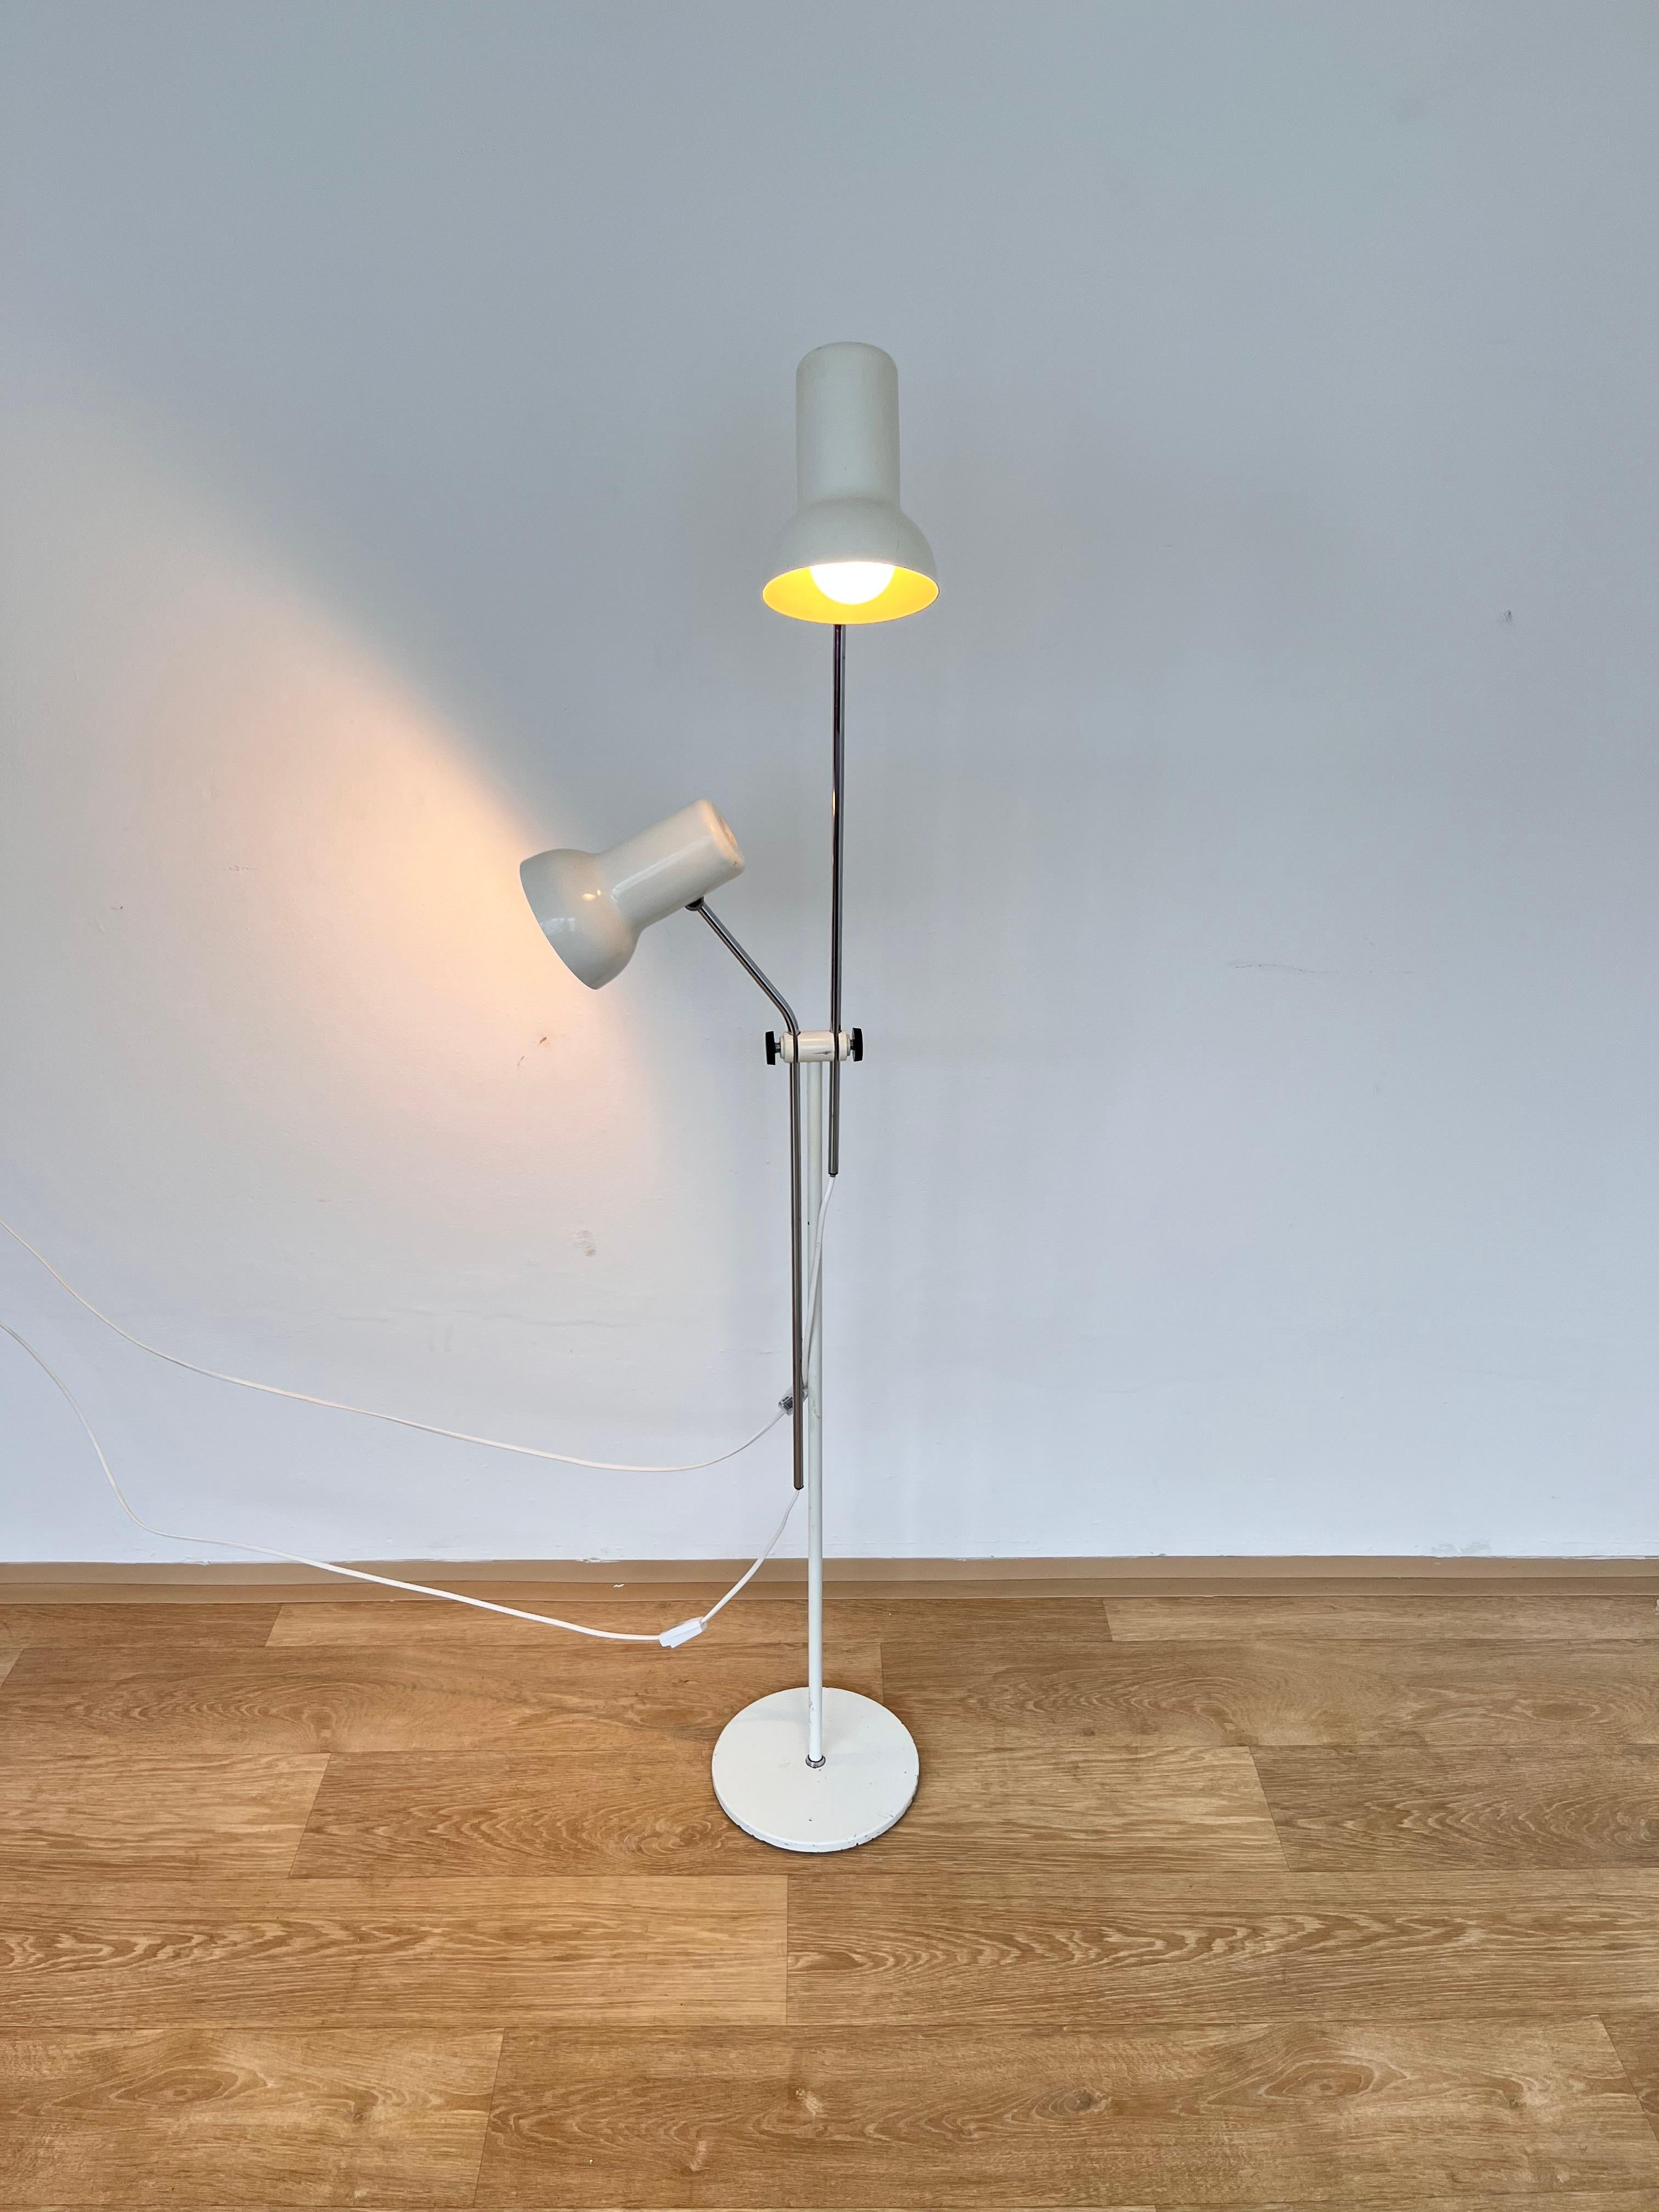 - height adjustable from about 109cm up to 151cm
- new electricity
- US adapter included
- two bulbs 
jr